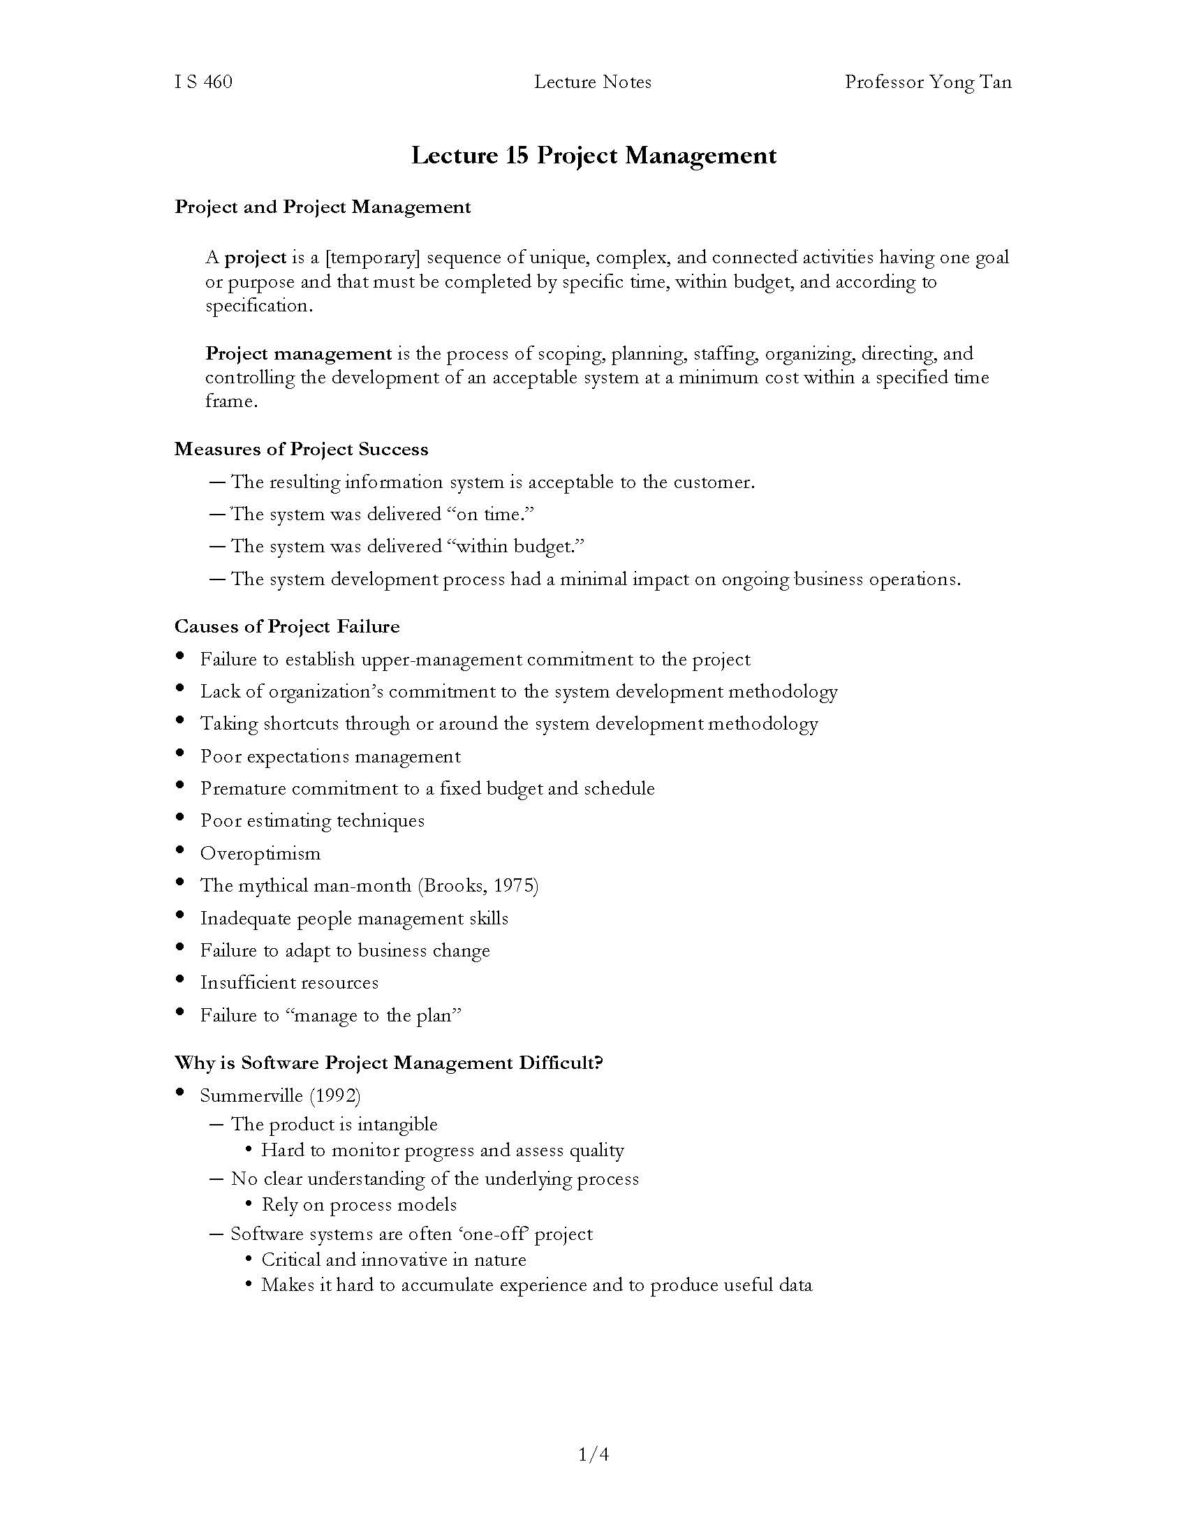 assignment of project management pdf